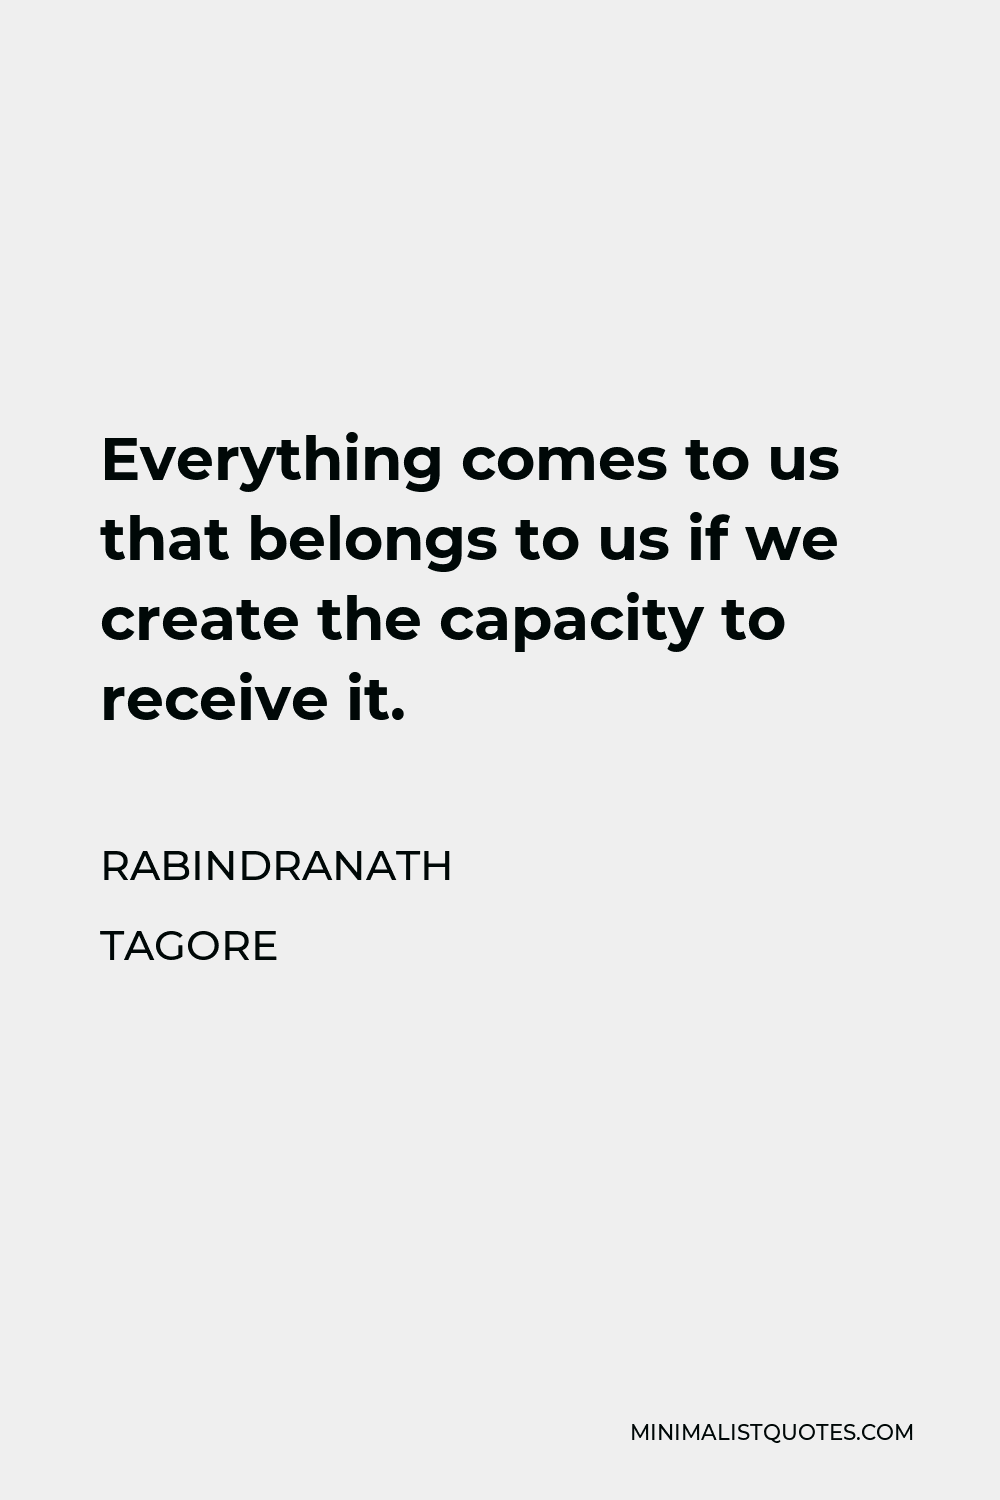 Rabindranath Tagore quote: Everything comes to us that belongs to us if  we